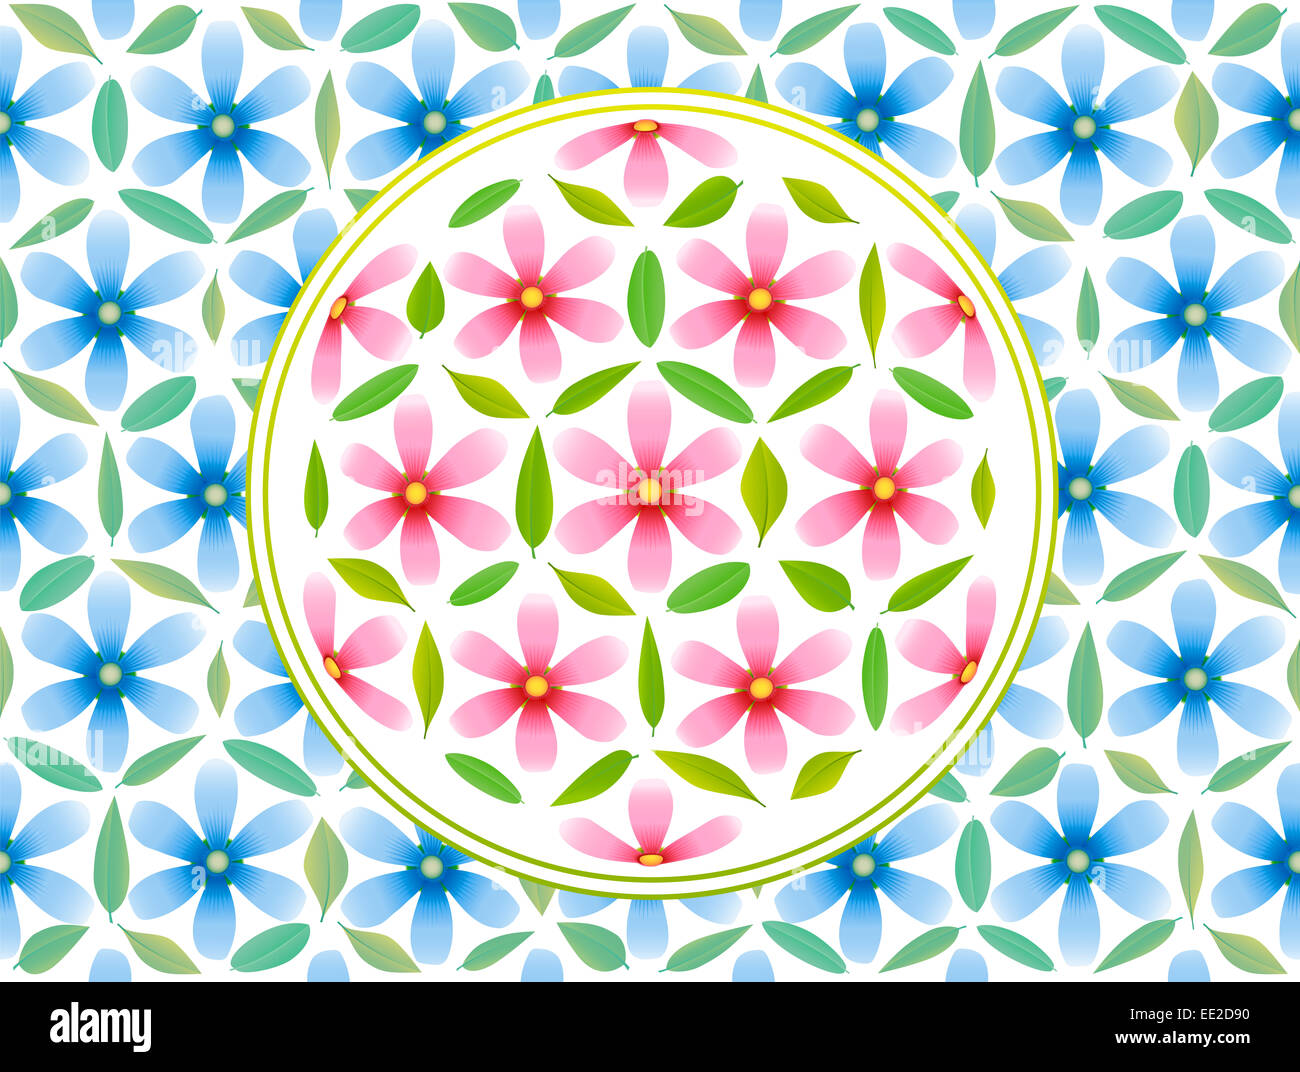 Flower of life symbol - composed of pink flowers and green leaves - and blue flowers in the background. Stock Photo